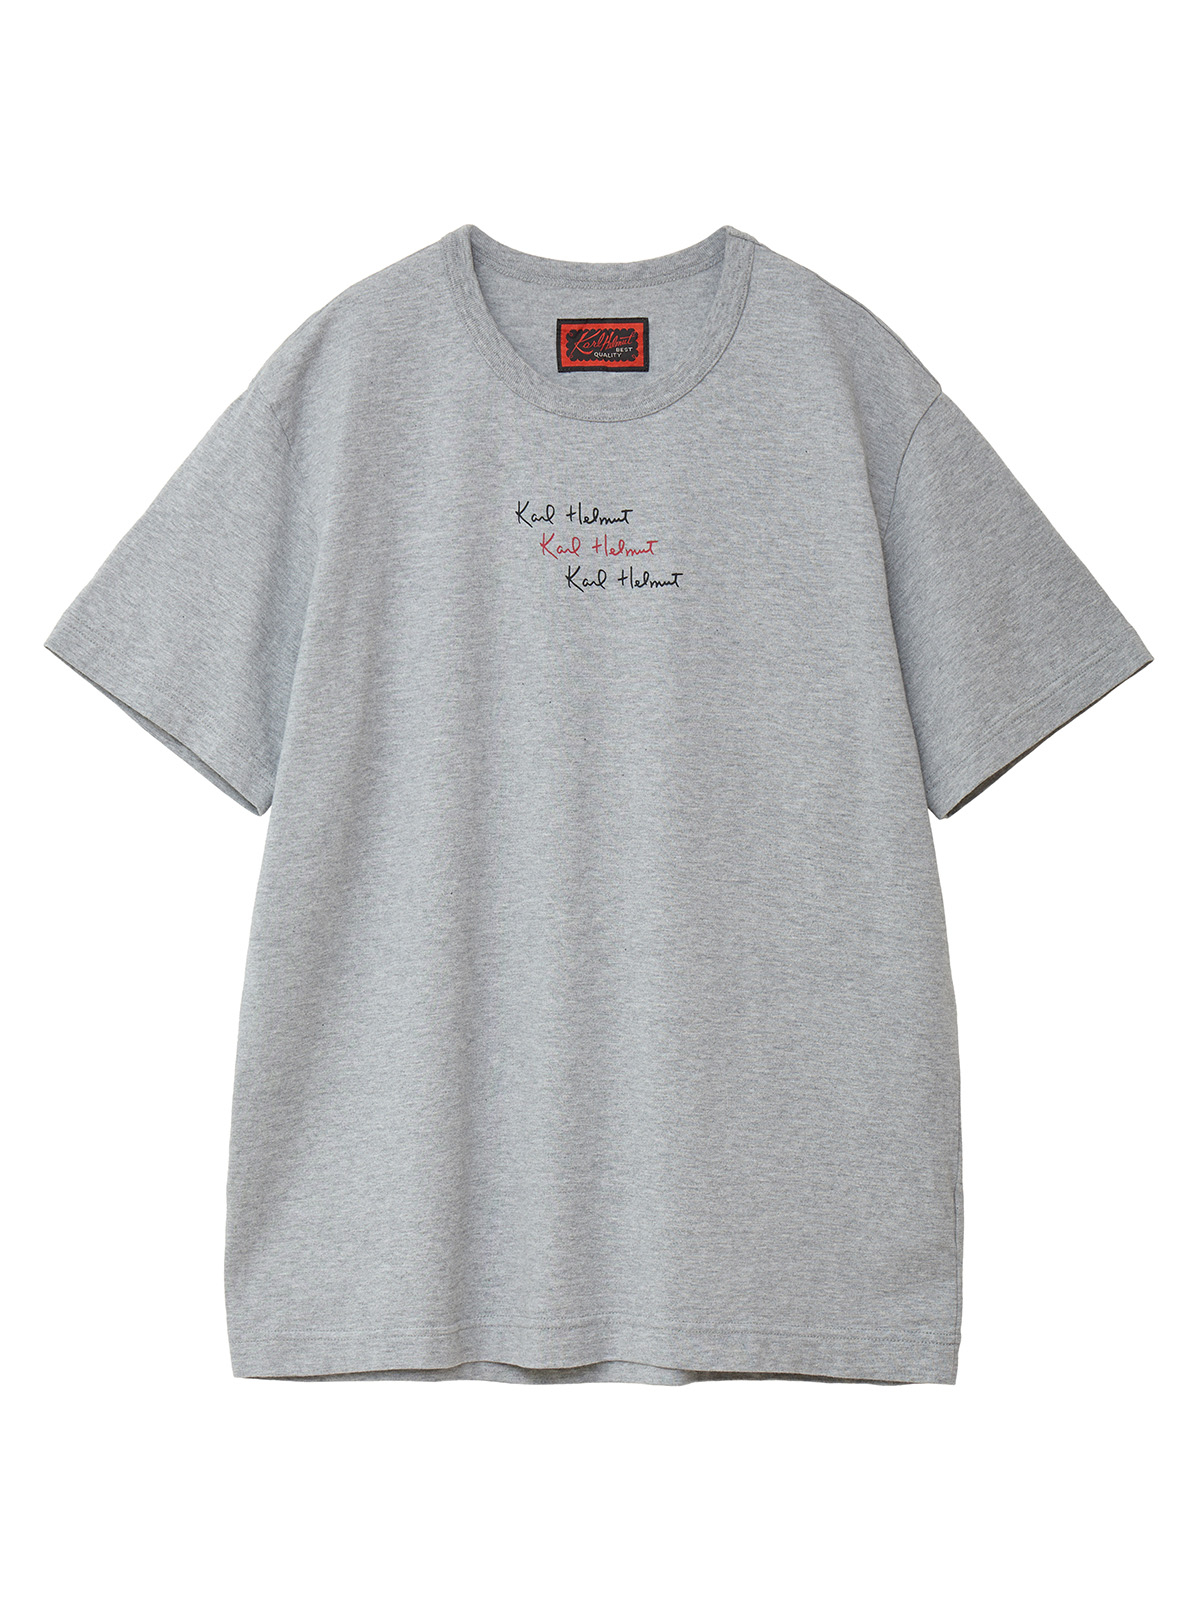 【Back Channel】OFFICIALロゴ プリント Tシャツ【XL】